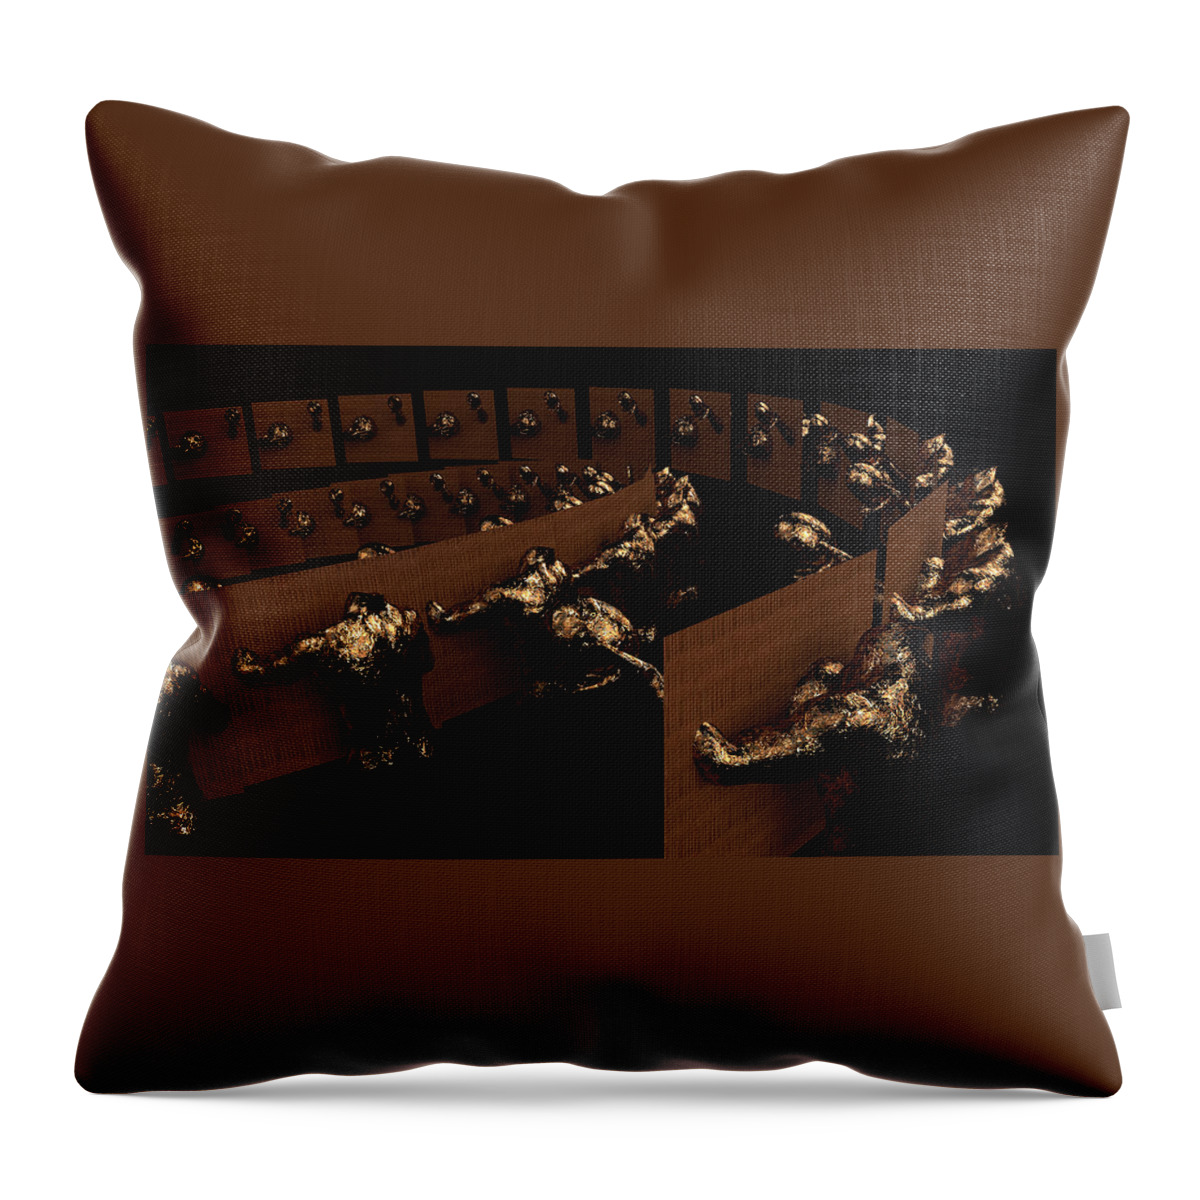 House Of Commons Throw Pillow featuring the digital art House of Uncommons by Carmen Hathaway